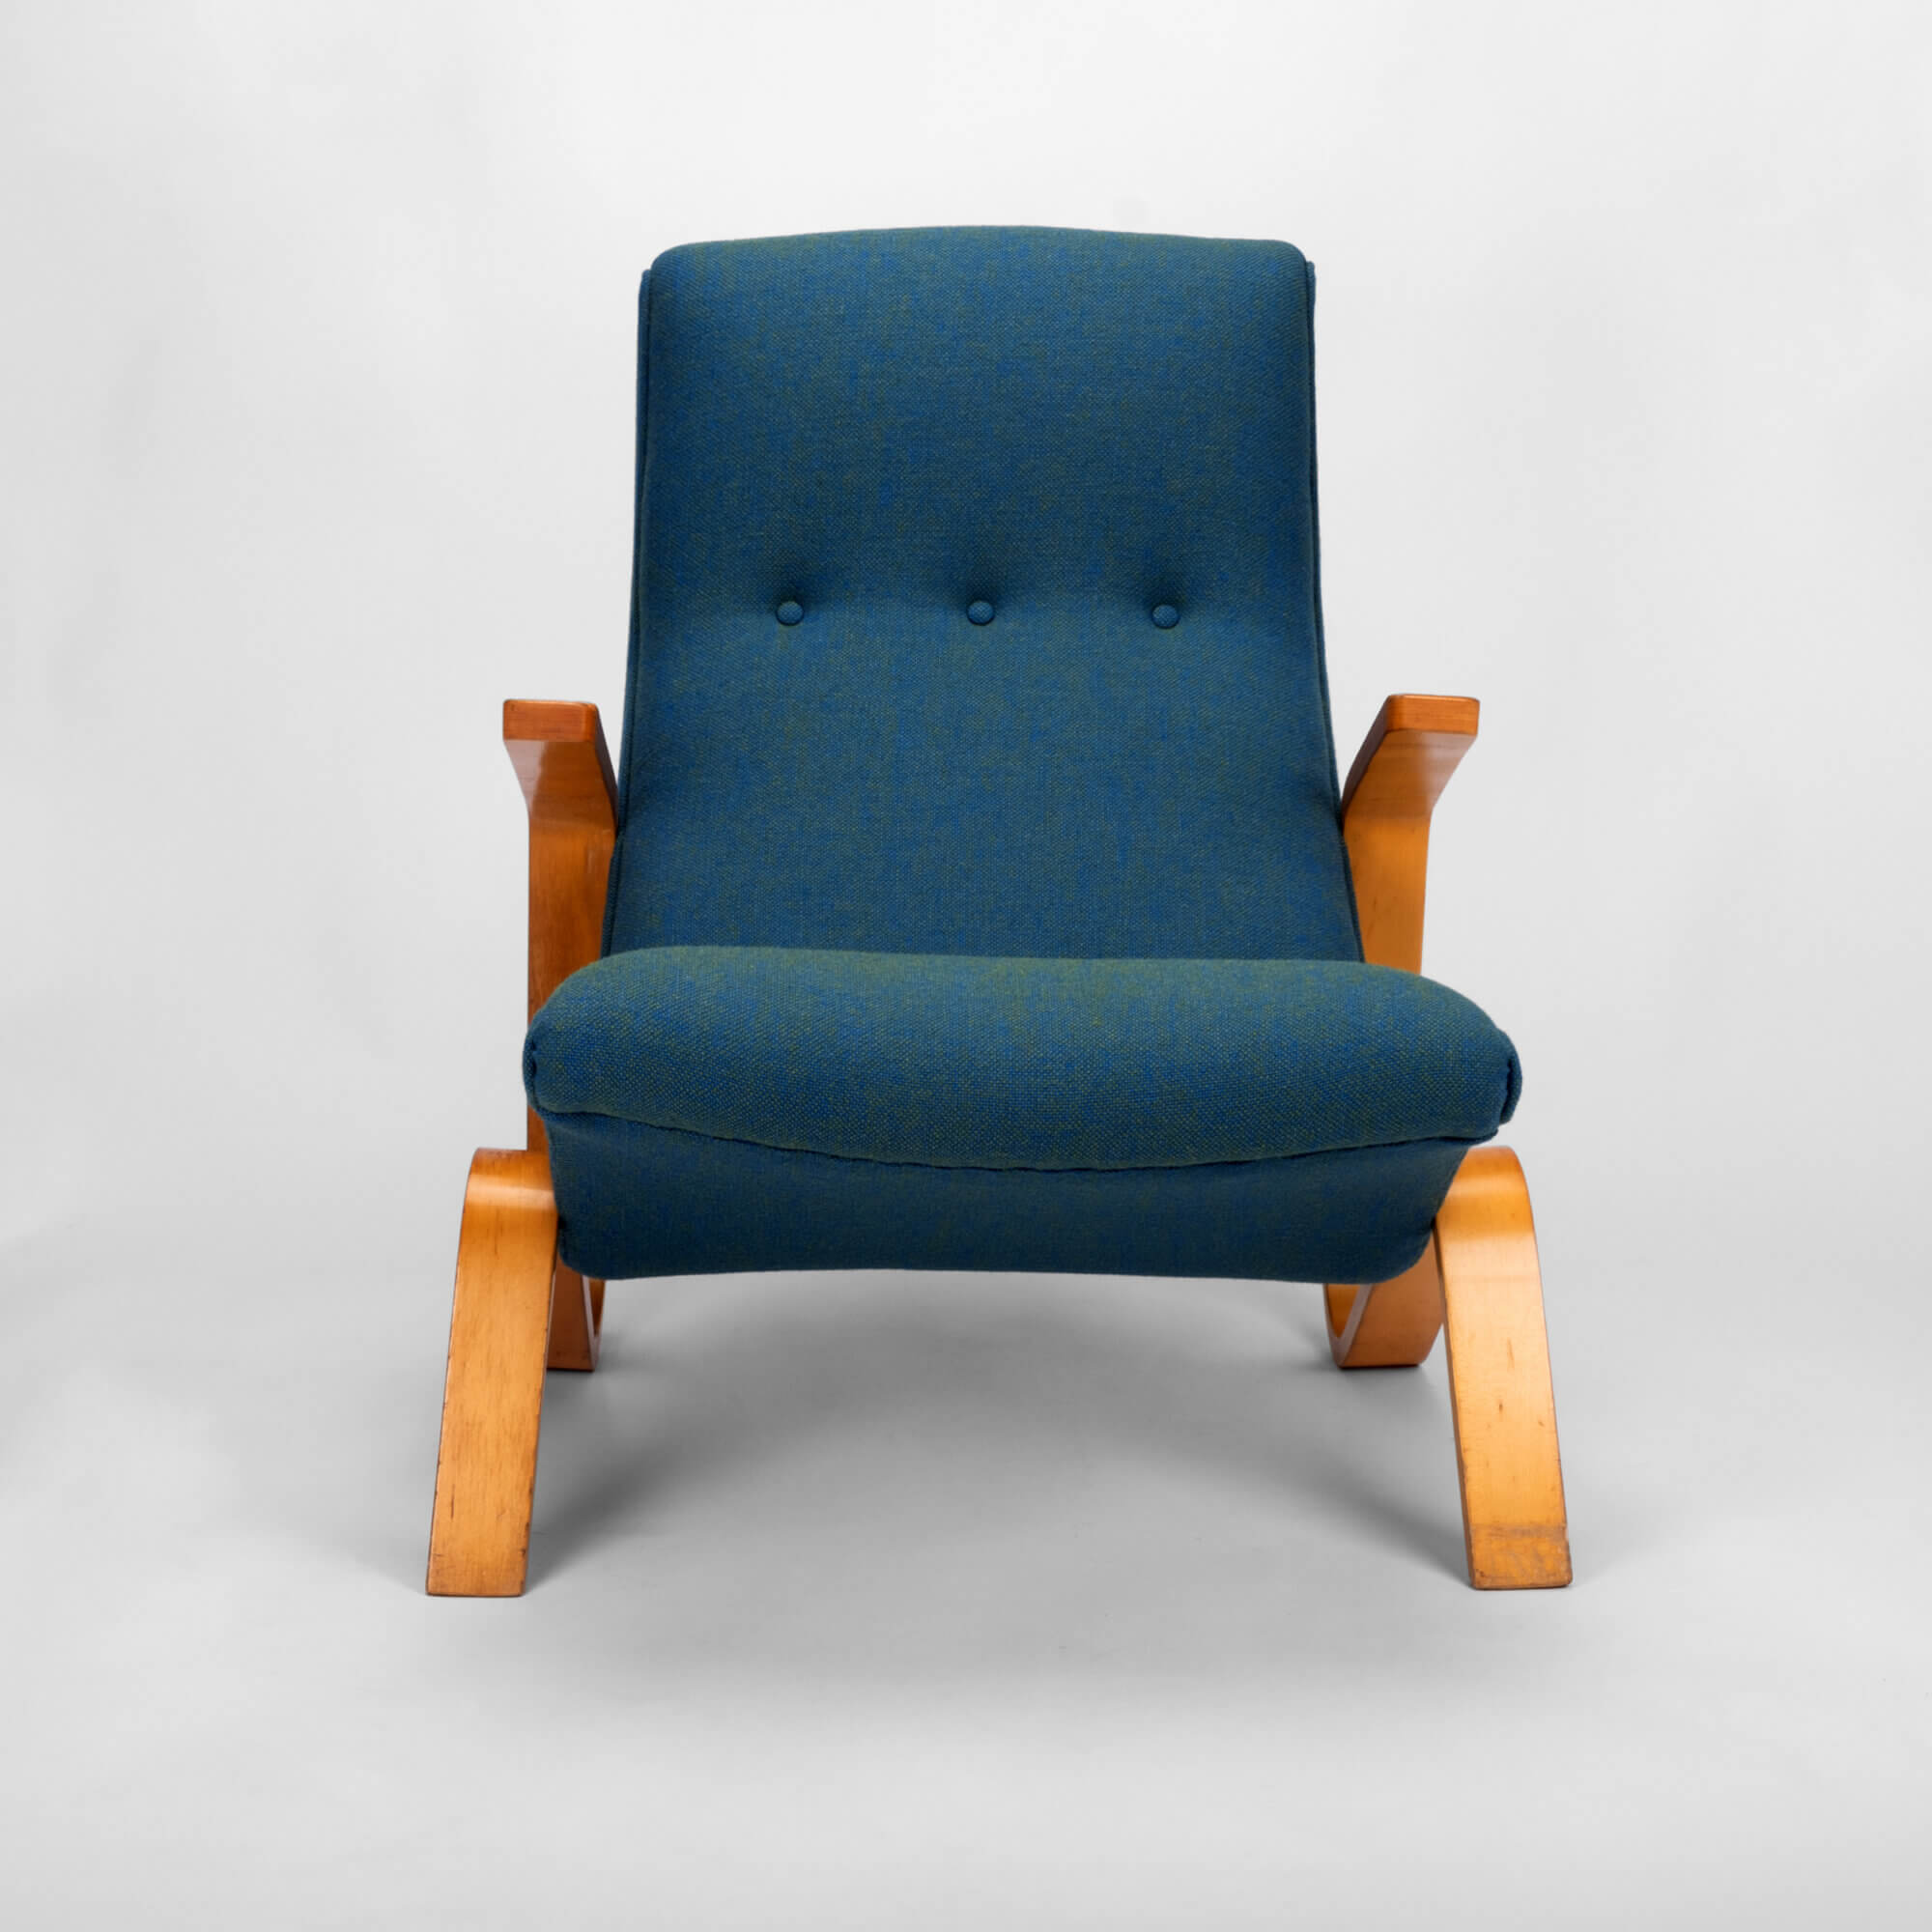 Eero Saarinen Grasshopper lounge chair shown from the front